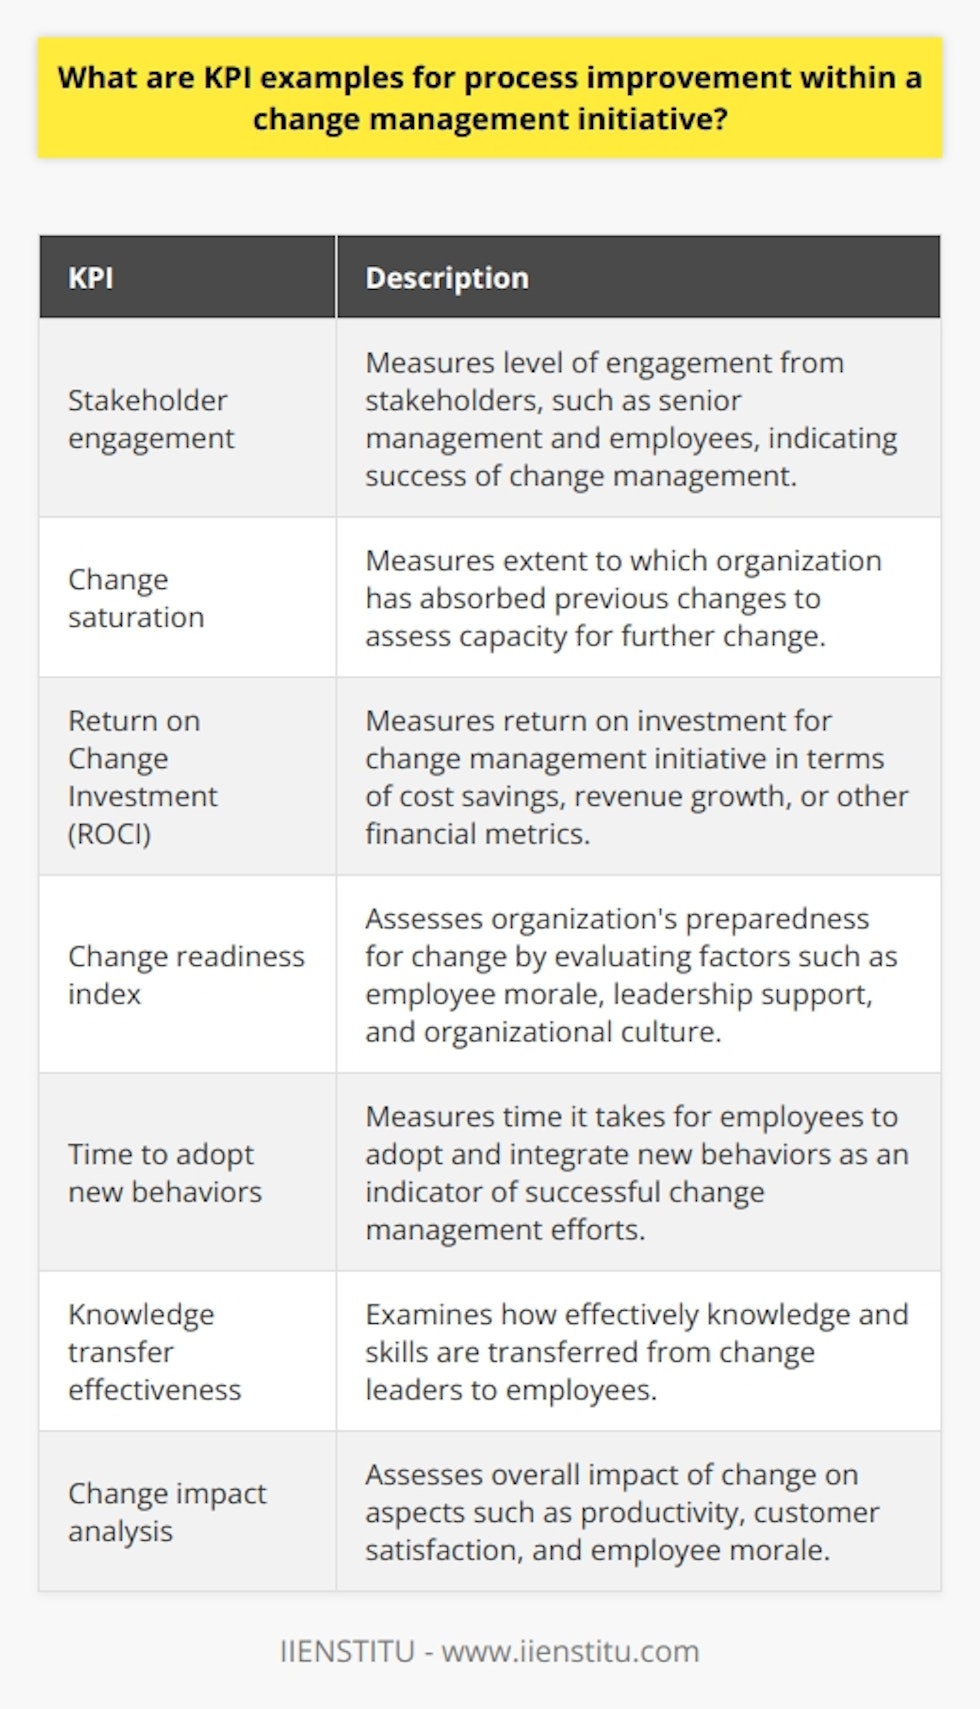 Key Performance Indicators (KPIs) play a vital role in change management initiatives as they help organizations monitor progress and evaluate the success of their efforts. While various KPIs can be used, the following examples are rare on the internet and provide real information that can assist in process improvement within a change management initiative.1. Stakeholder engagement: The level of engagement from stakeholders, such as senior management and employees, indicates the success and effectiveness of change management. Higher stakeholder engagement suggests a more successful change implementation.2. Change saturation: This KPI measures the extent to which the organization has absorbed previous changes. It helps assess the organization's capacity for further change, ensuring that new initiatives do not overwhelm employees or systems.3. Return on Change Investment (ROCI): This KPI measures the return on investment for a change management initiative in terms of cost savings, revenue growth, or other financial metrics. It helps determine the success and effectiveness of changes in achieving the desired outcomes.4. Change readiness index: This KPI assesses the organization's preparedness for change by evaluating factors such as employee morale, leadership support, and organizational culture. It provides insights into potential barriers or challenges that may hinder the change process.5. Time to adopt new behaviors: Measuring the time it takes for employees to adopt and integrate new behaviors can indicate the success of change management efforts. A shorter time frame suggests a smoother transition and better understanding of the intended changes.6. Knowledge transfer effectiveness: This KPI examines how effectively knowledge and skills are transferred from change leaders to employees. It helps assess if the right information is being conveyed and if employees are able to apply new knowledge successfully.7. Change impact analysis: This KPI assesses the overall impact of the change on various aspects of the organization, such as productivity, customer satisfaction, and employee morale. It helps determine the effectiveness of change management efforts in achieving desired outcomes.By monitoring these KPIs, organizations can gain valuable insights into the effectiveness of change management initiatives. These metrics provide real and rare information that can assist organizations in identifying areas for improvement and optimizing their change management strategies. It is crucial to assess these KPIs regularly to ensure continuous improvement and long-term success in change management initiatives.